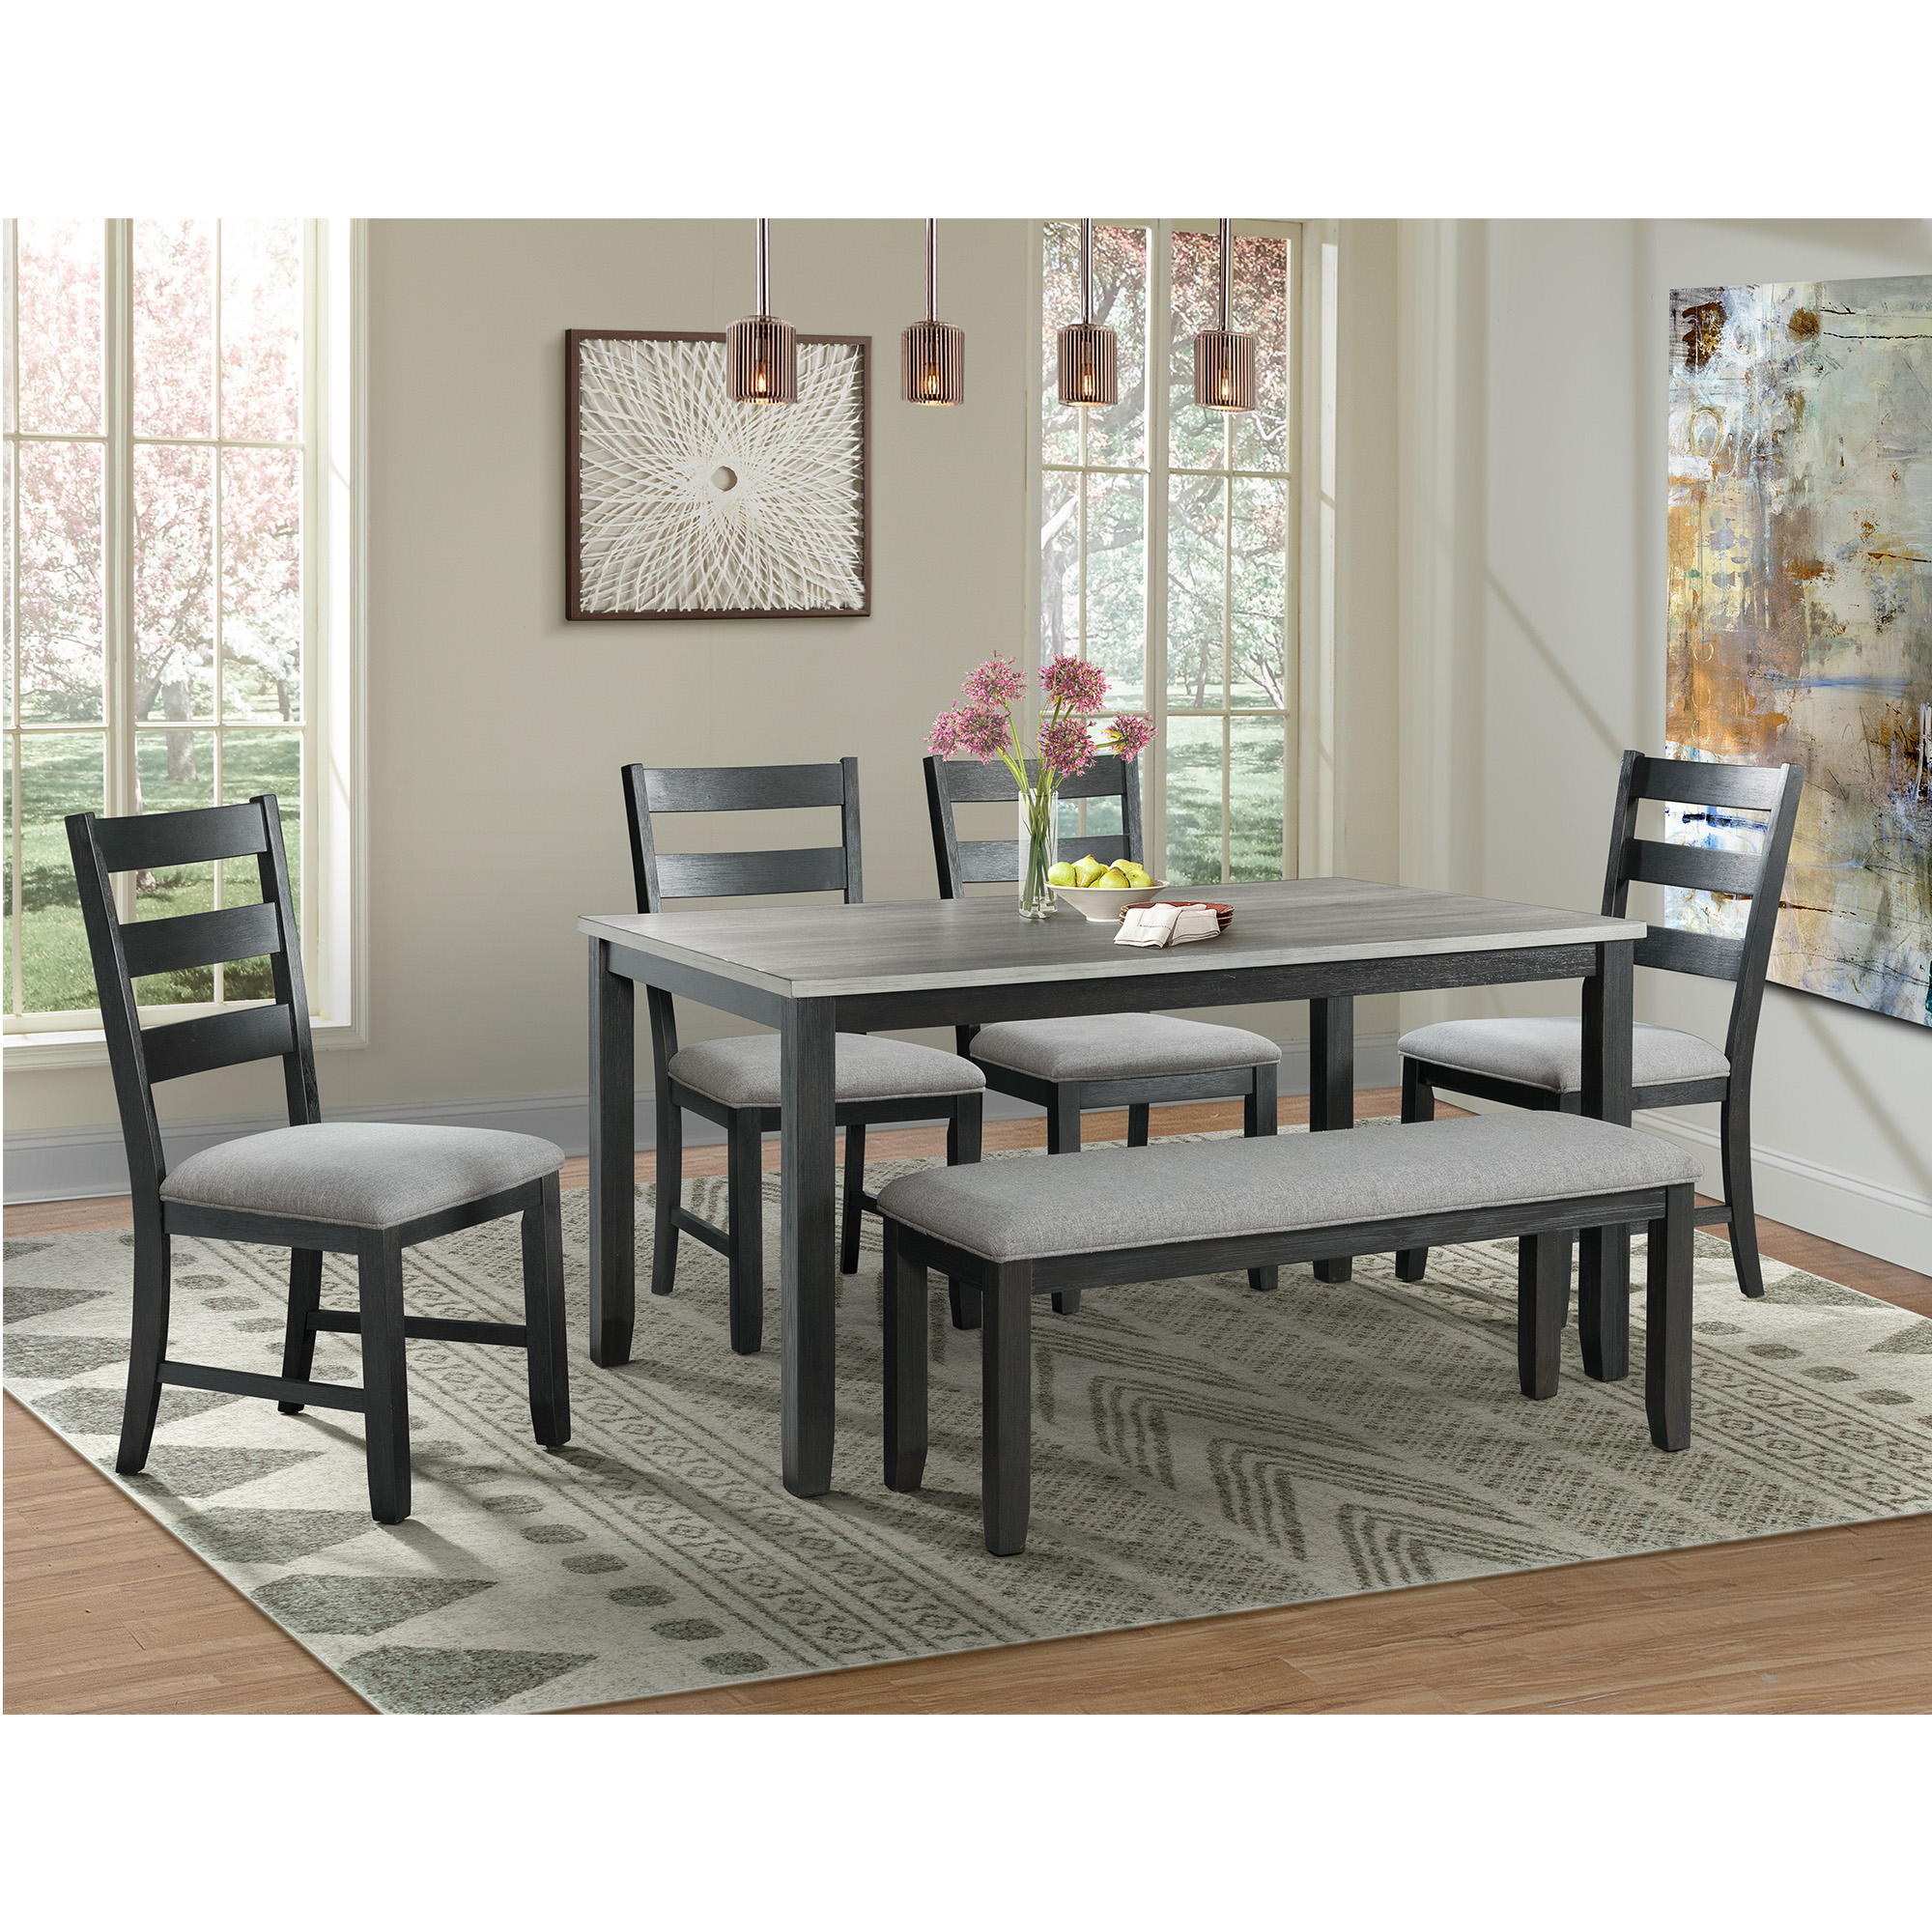 Picket House Furnishings Kona Gray 6PC Dining Set-Table, Four Chairs & Bench - image 1 of 15